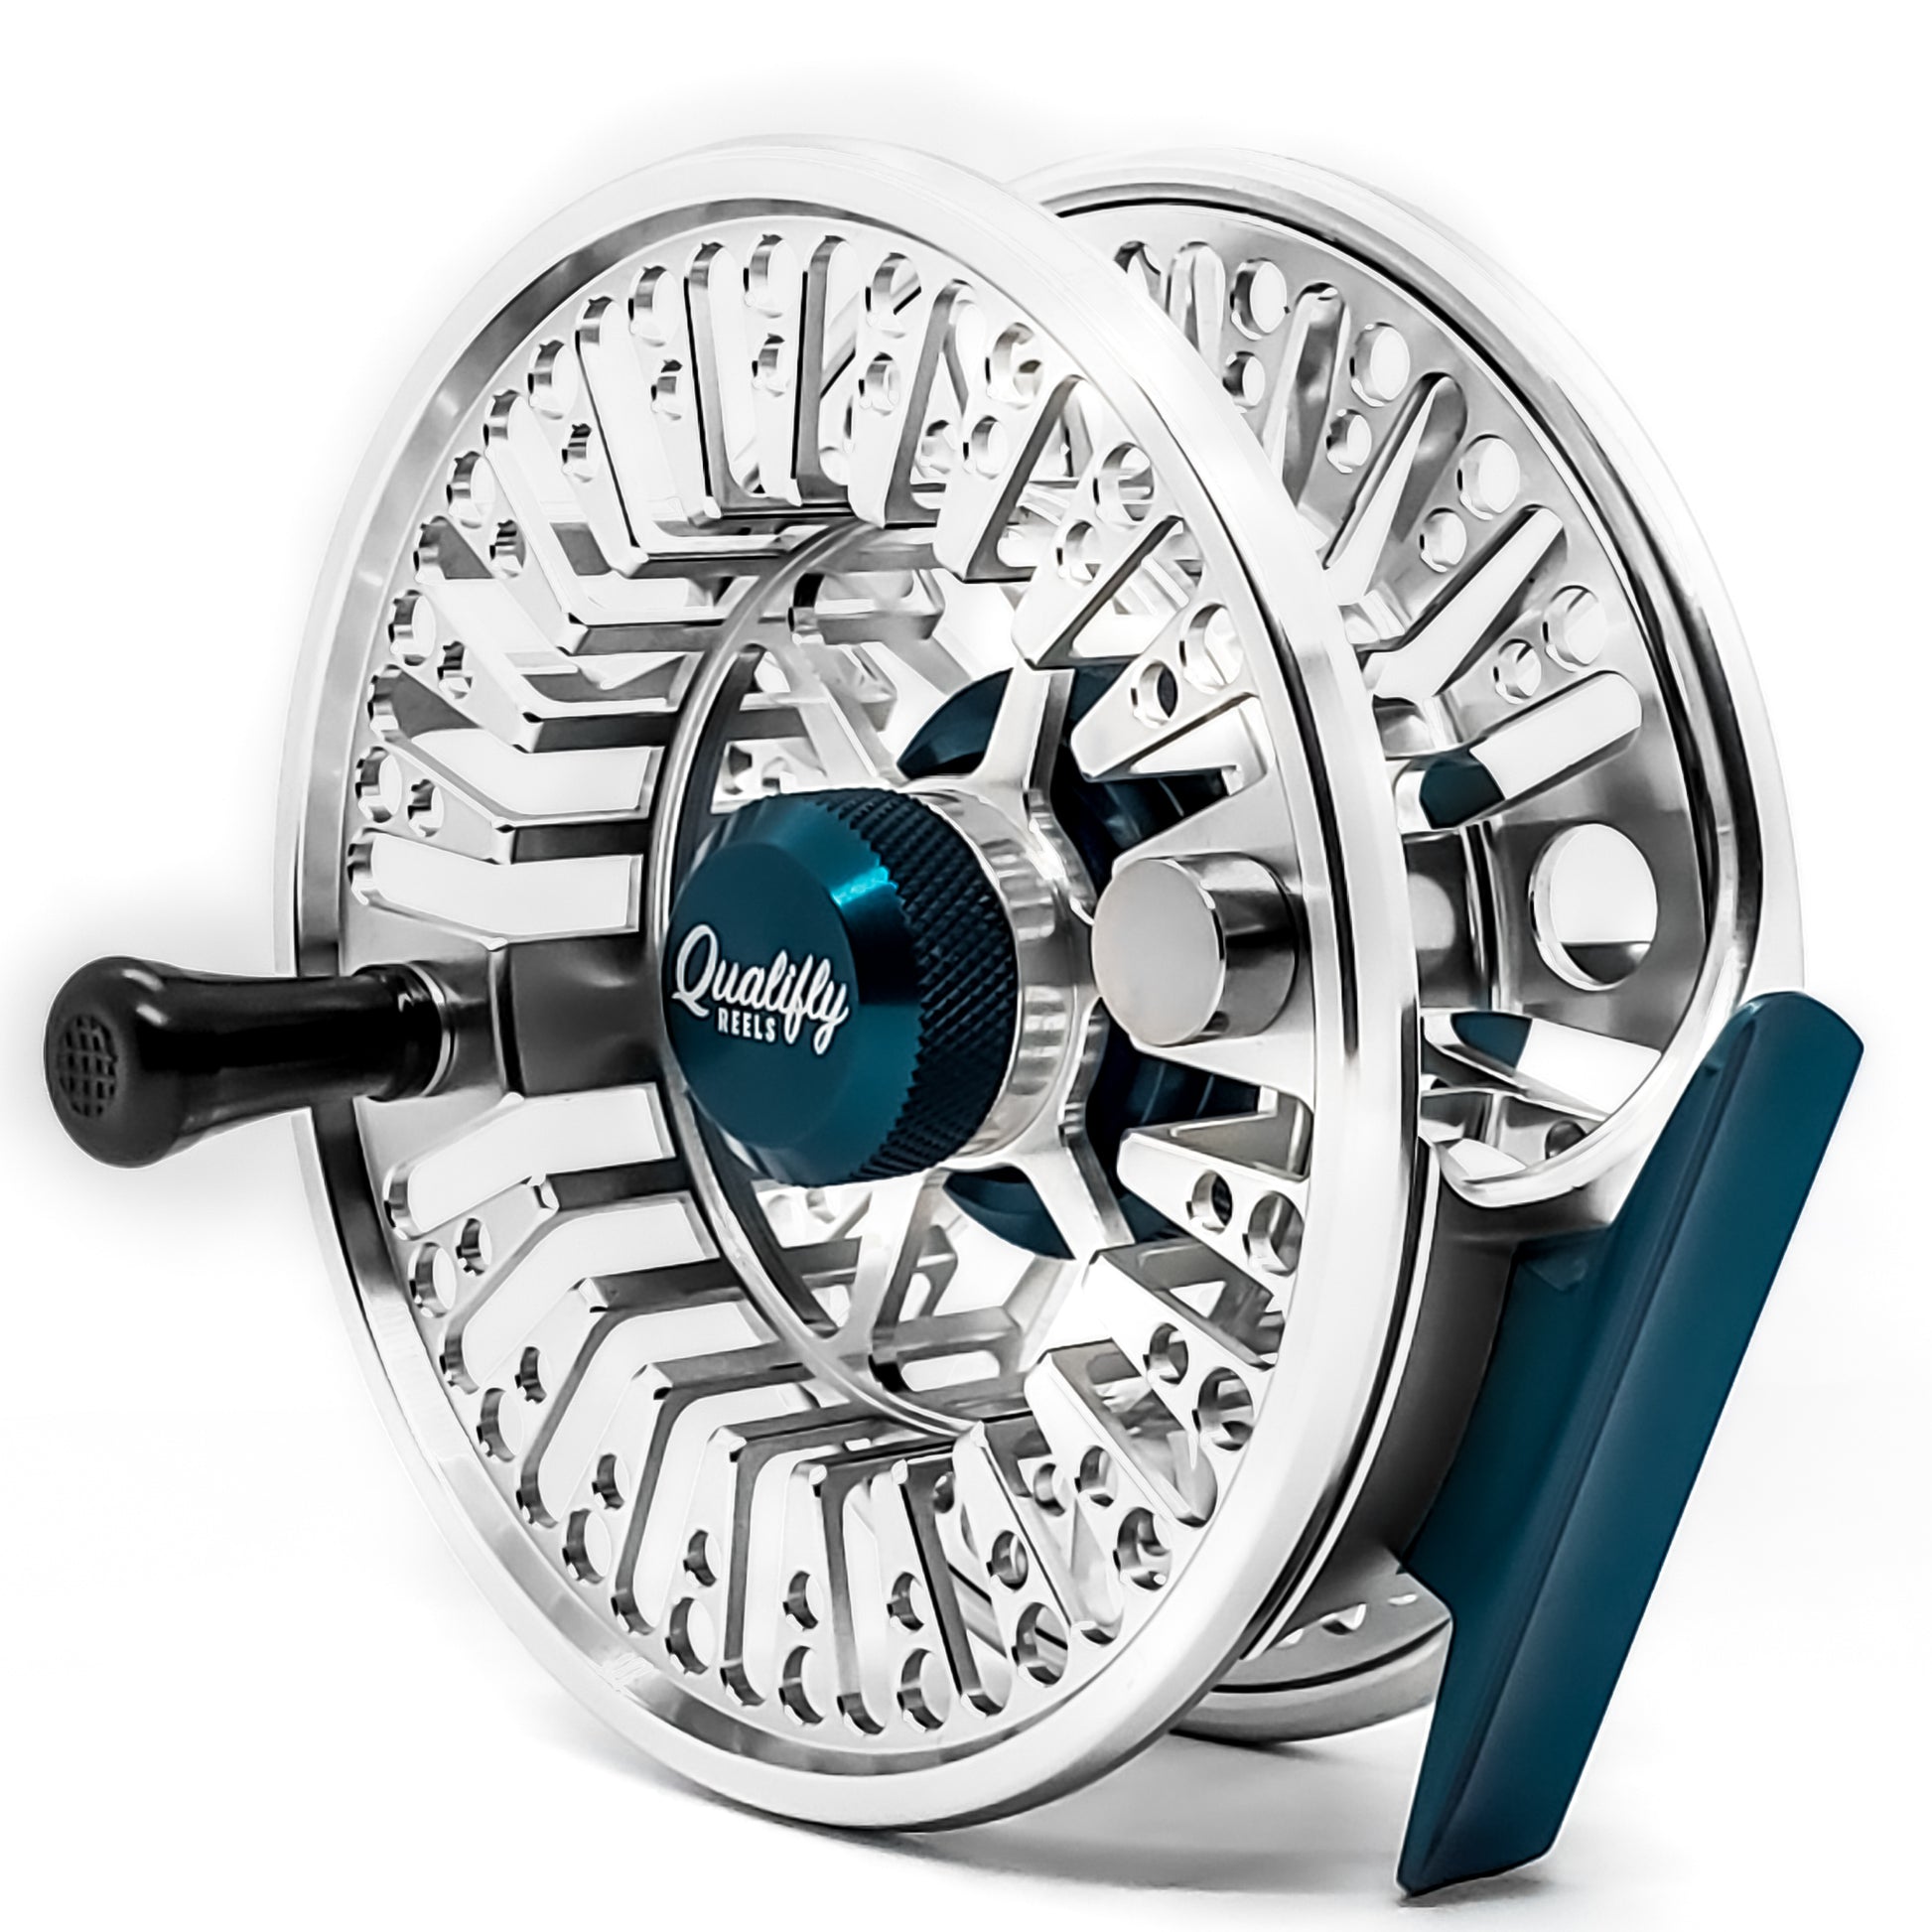 Qualifly CARBONTECH 9/10 Weight Fly Fishing Reel